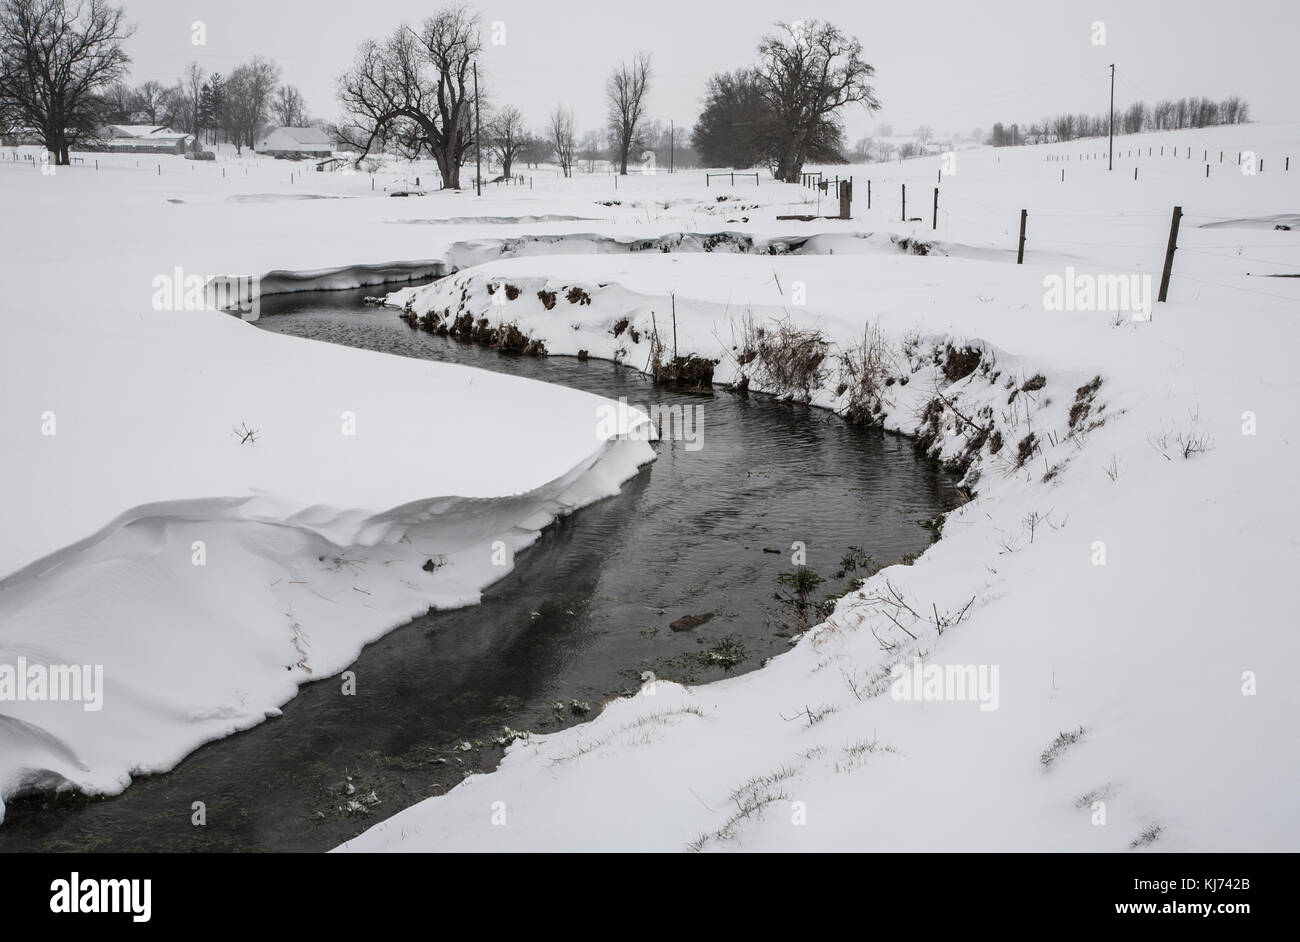 A stream meandering through Amish farmland, Lancaster County, rural Pennsylvania, USA, US, Amish country snow storm snowy field winter Landscape Stock Photo